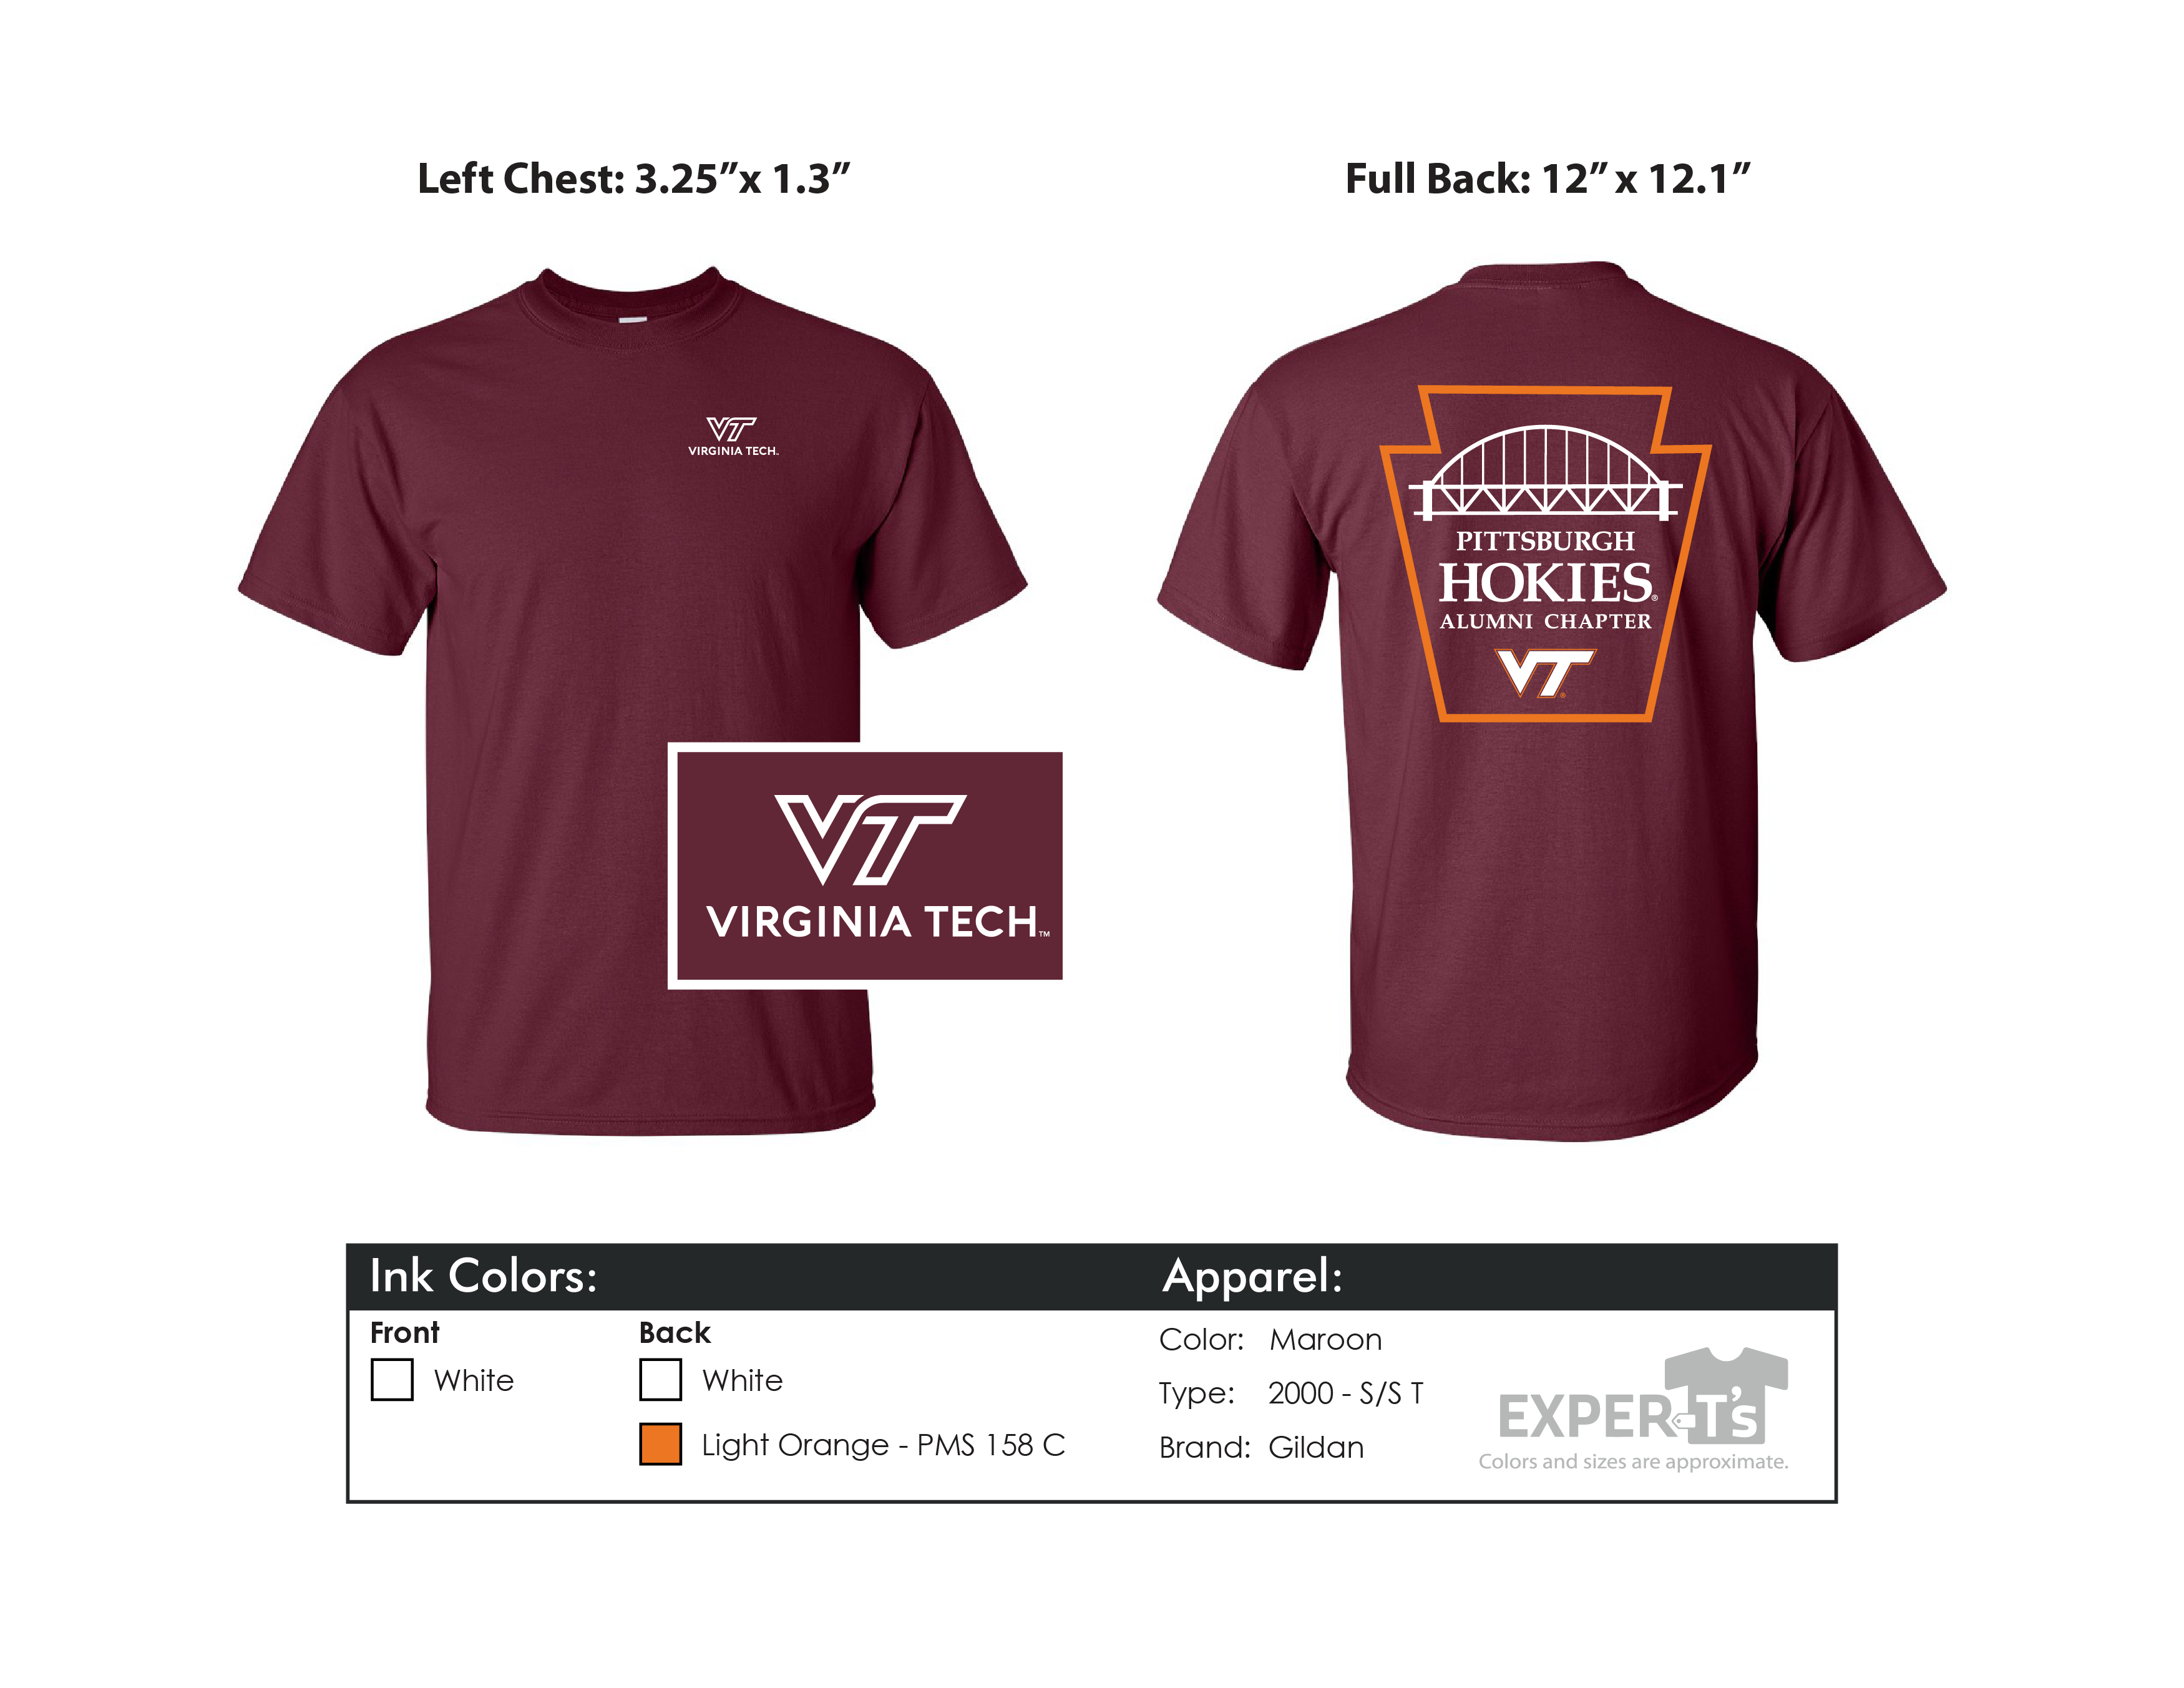 Pittsburgh Hokies Shirts are Ready for Order